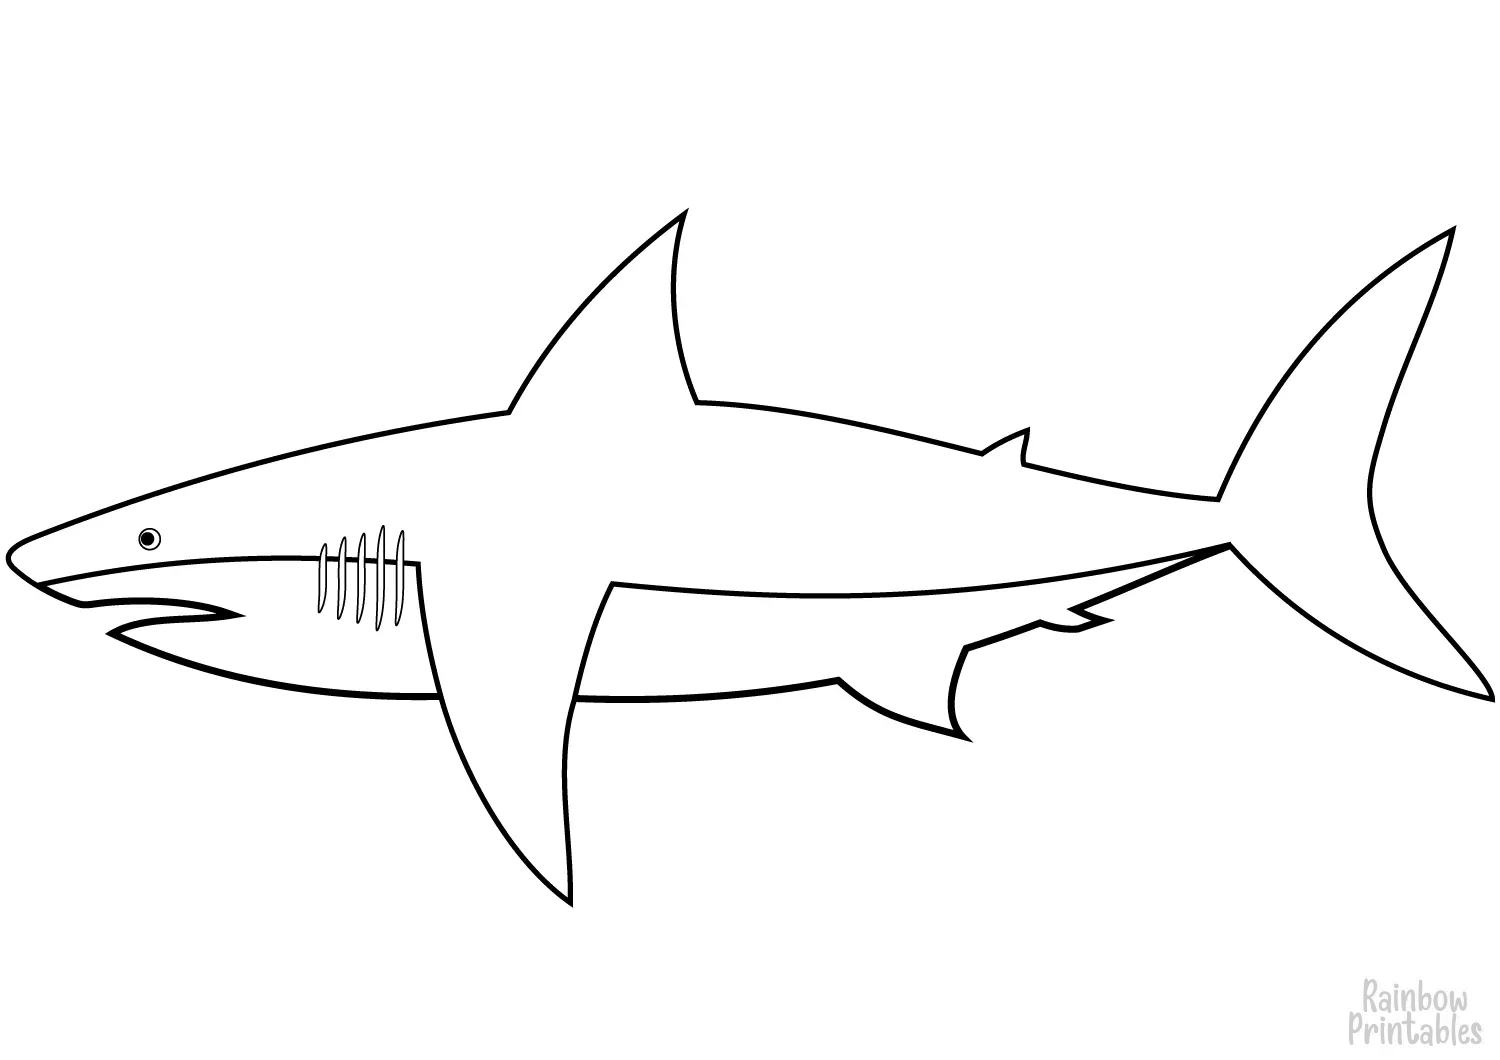 SIMPLE-EASY-line-drawings-FISH-SHARK-coloring-page-for-kids